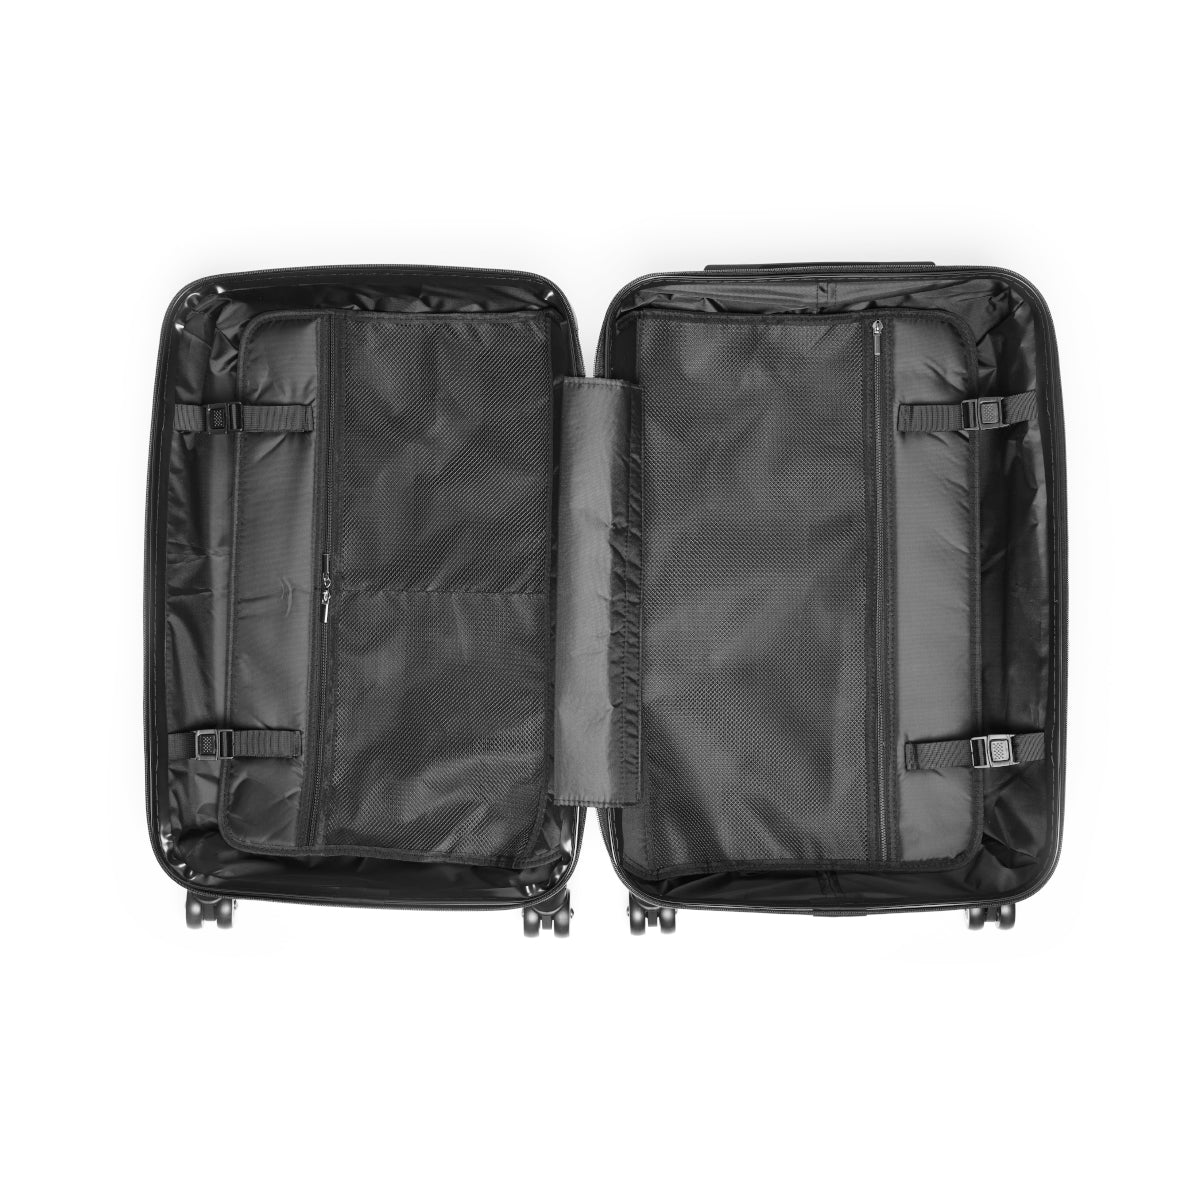 Getrott Scrambled Eggs in Microwave Black Cabin Suitcase Inner Pockets Extended Storage Adjustable Telescopic Handle Inner Pockets Double wheeled Polycarbonate Hard-shell Built-in Lock